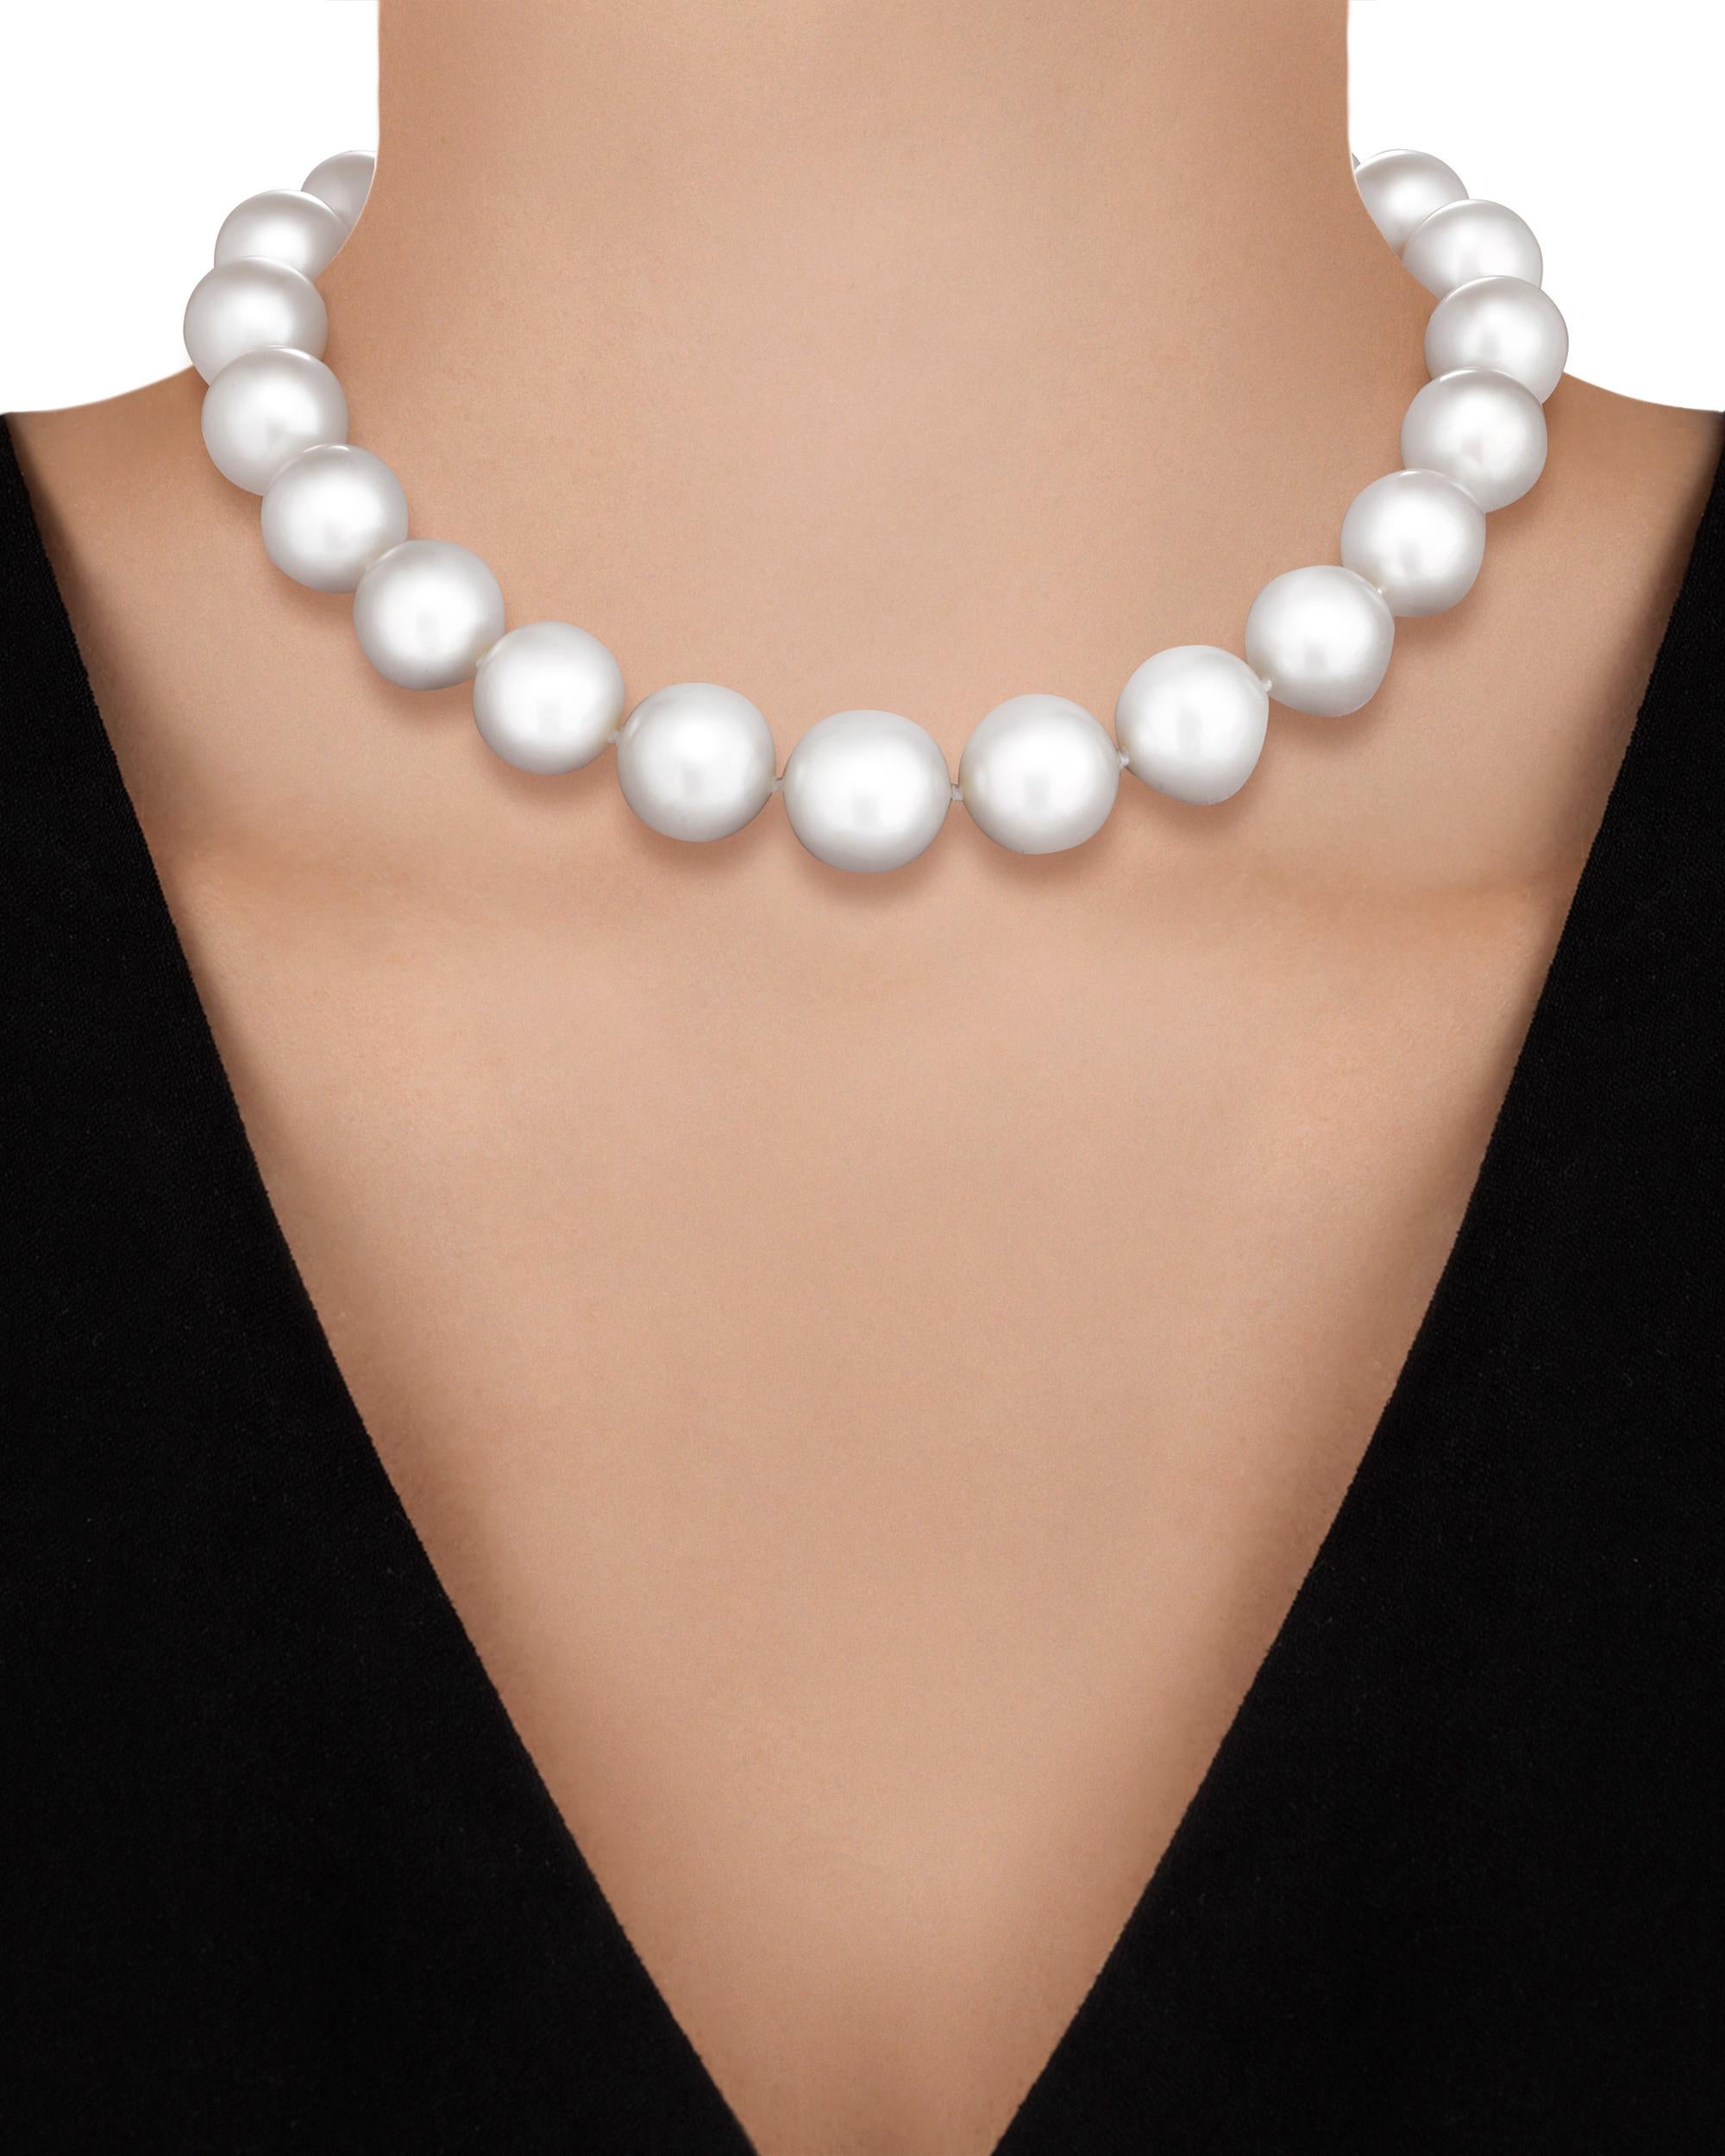 South Sea pearls are among the largest and most coveted pearls in the world, and the 23 examples in this classic strand necklace can be counted among the finest of their kind. While most South Sea pearls measure between 10 and 15mm, these monumental